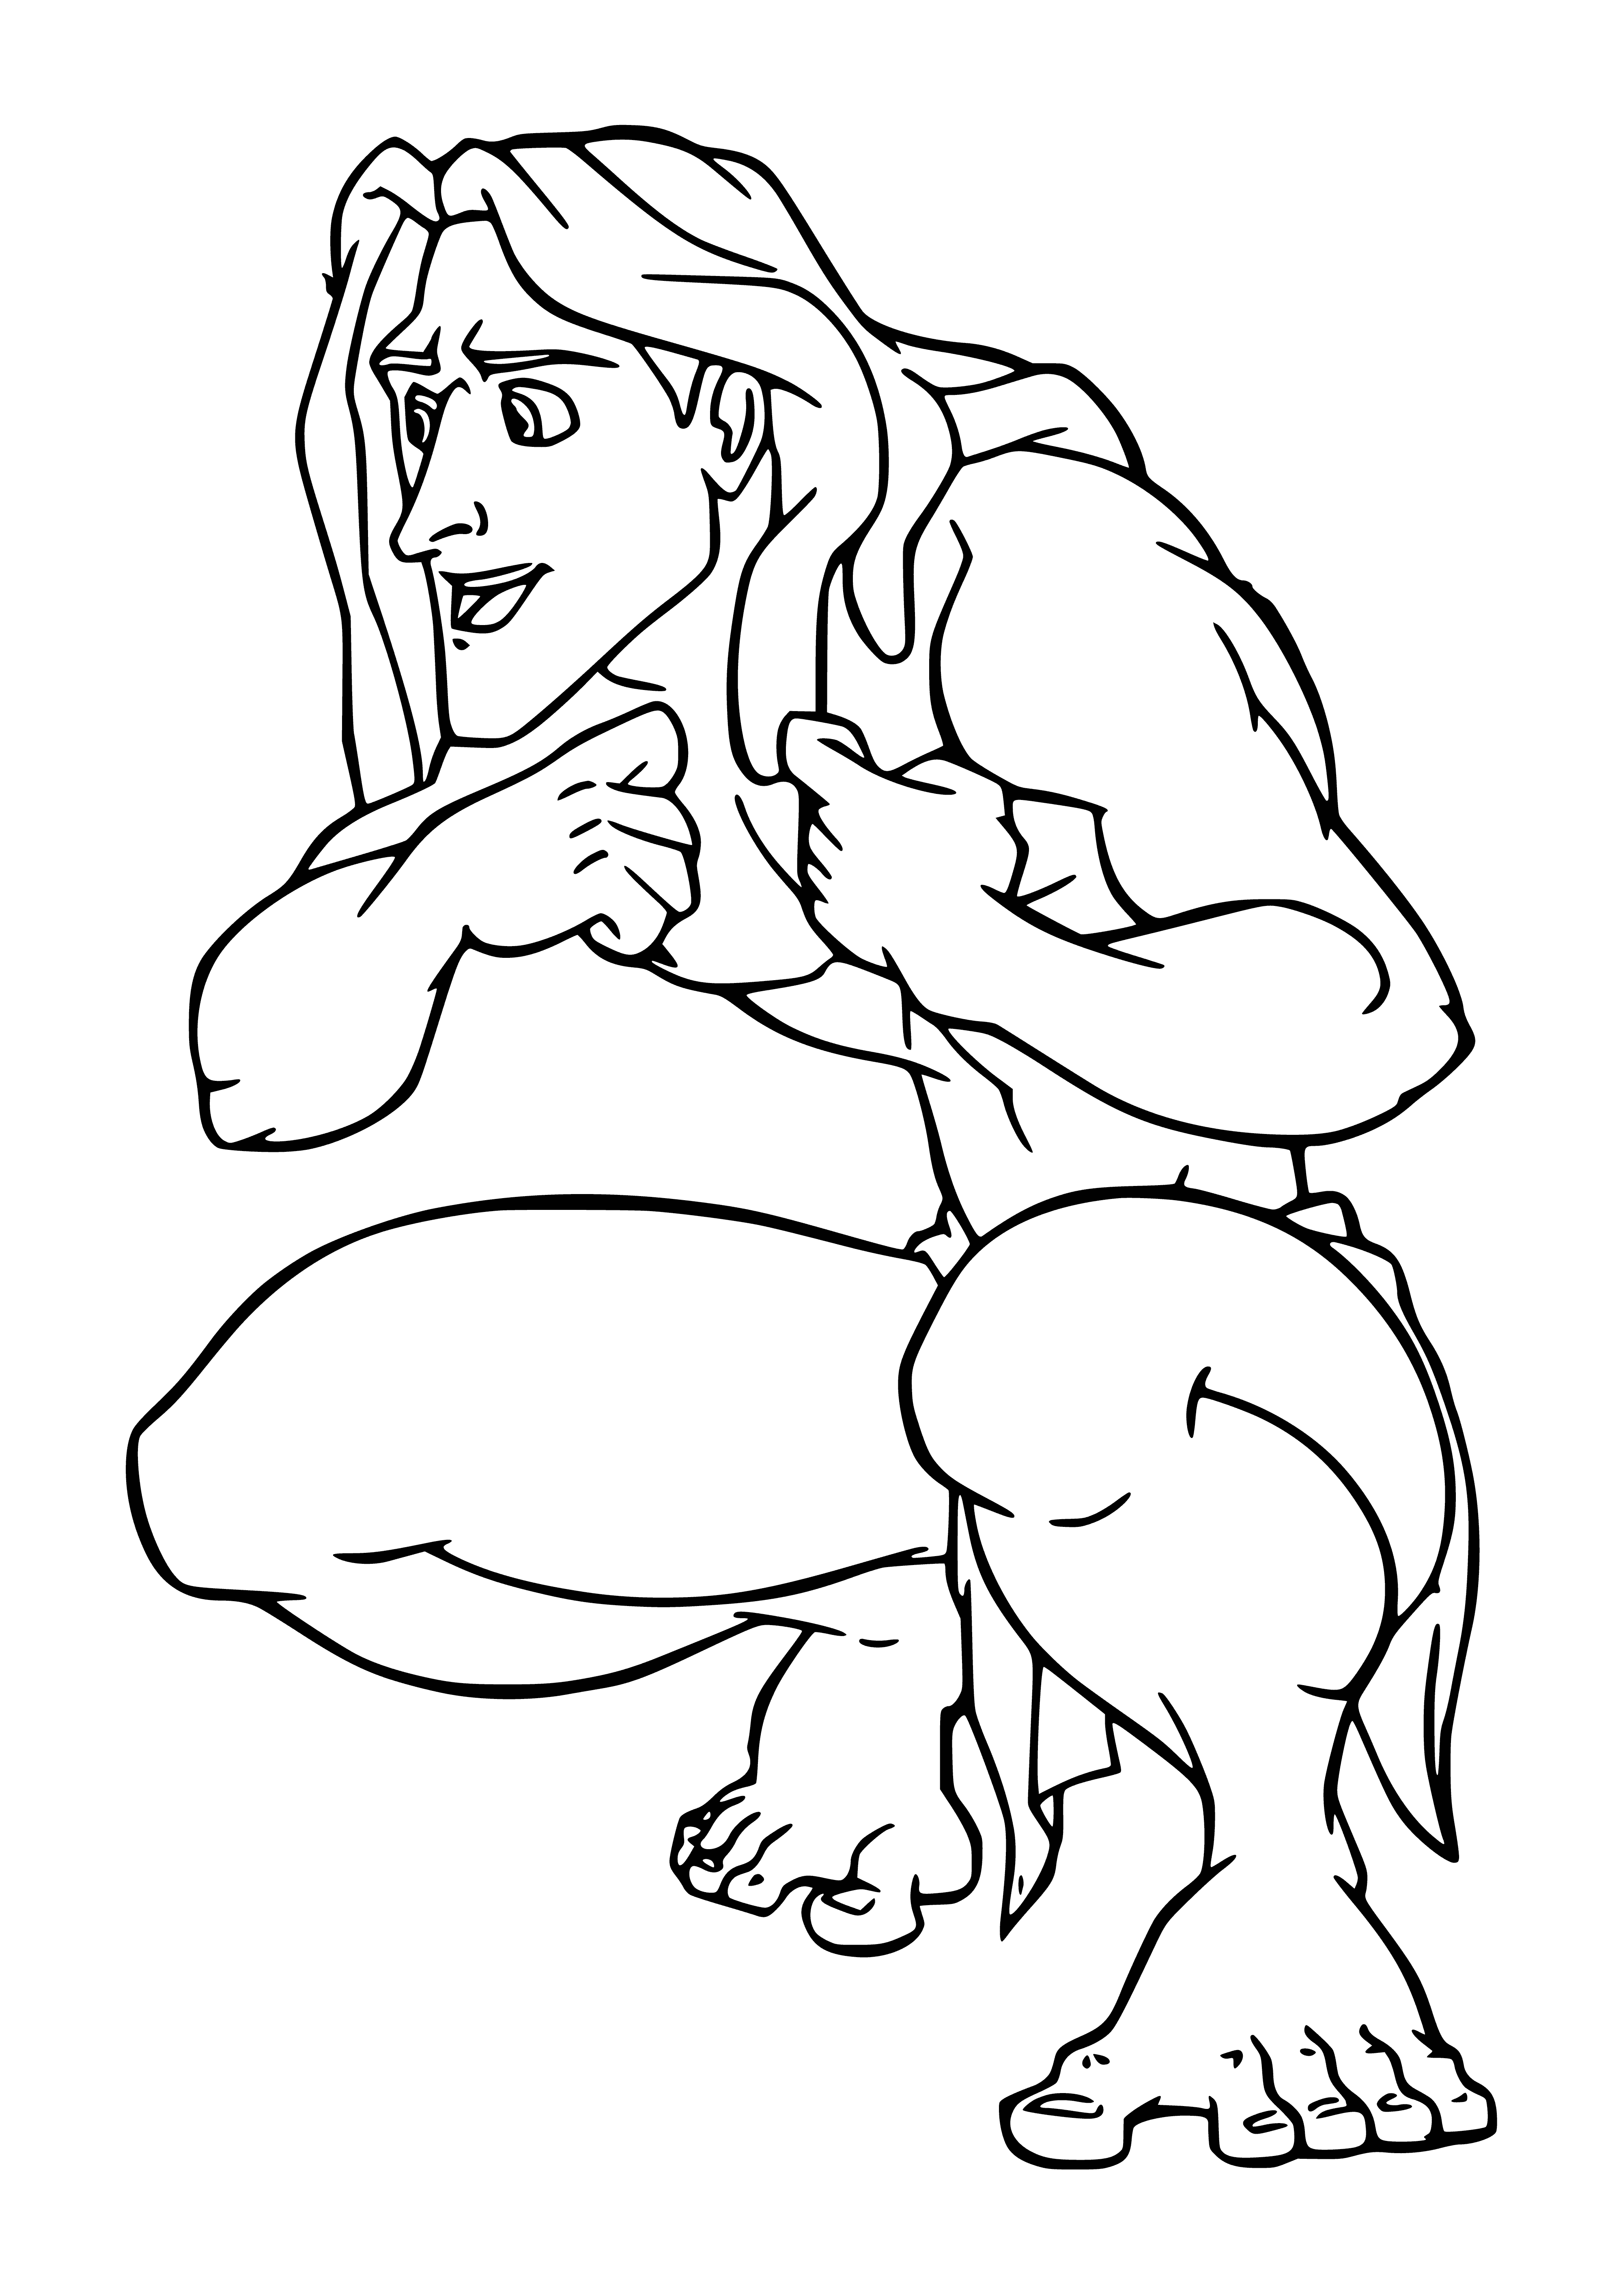 coloring page: A man stands on a branch in a jungle, rope in hand, gazing up.